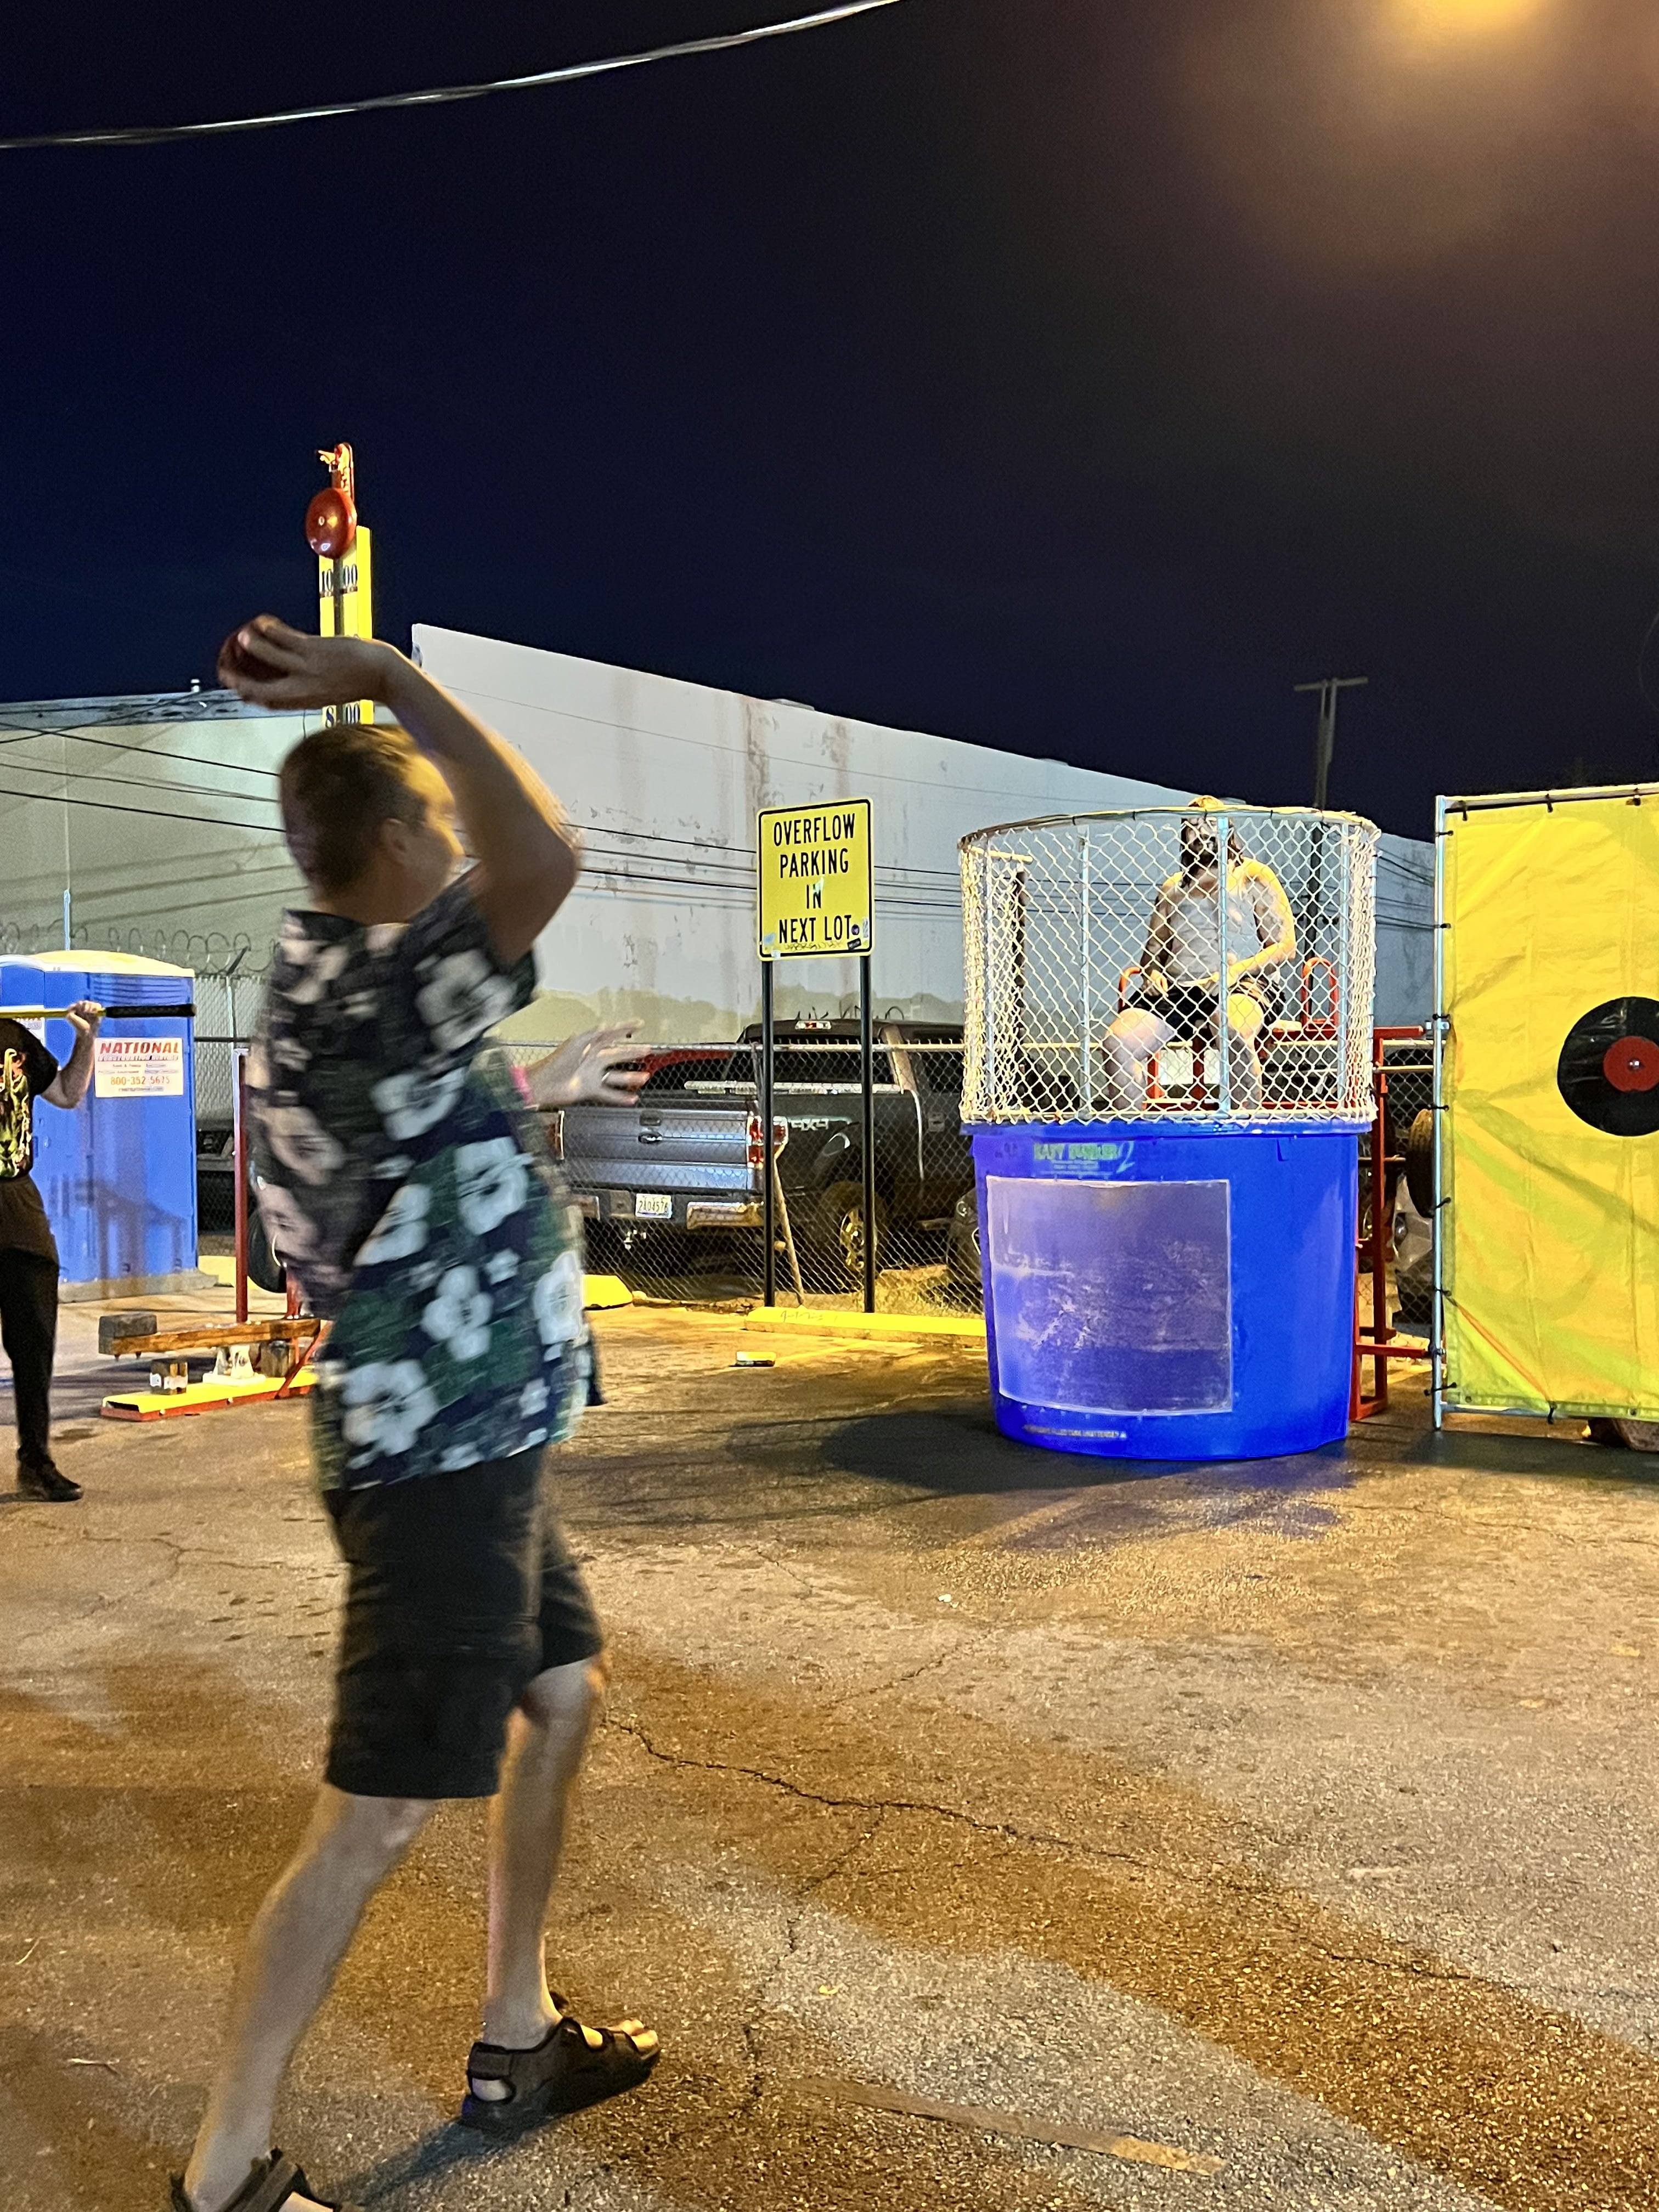 dunking booth at Hard Hat Lounge grand reopening in downtown las vegas